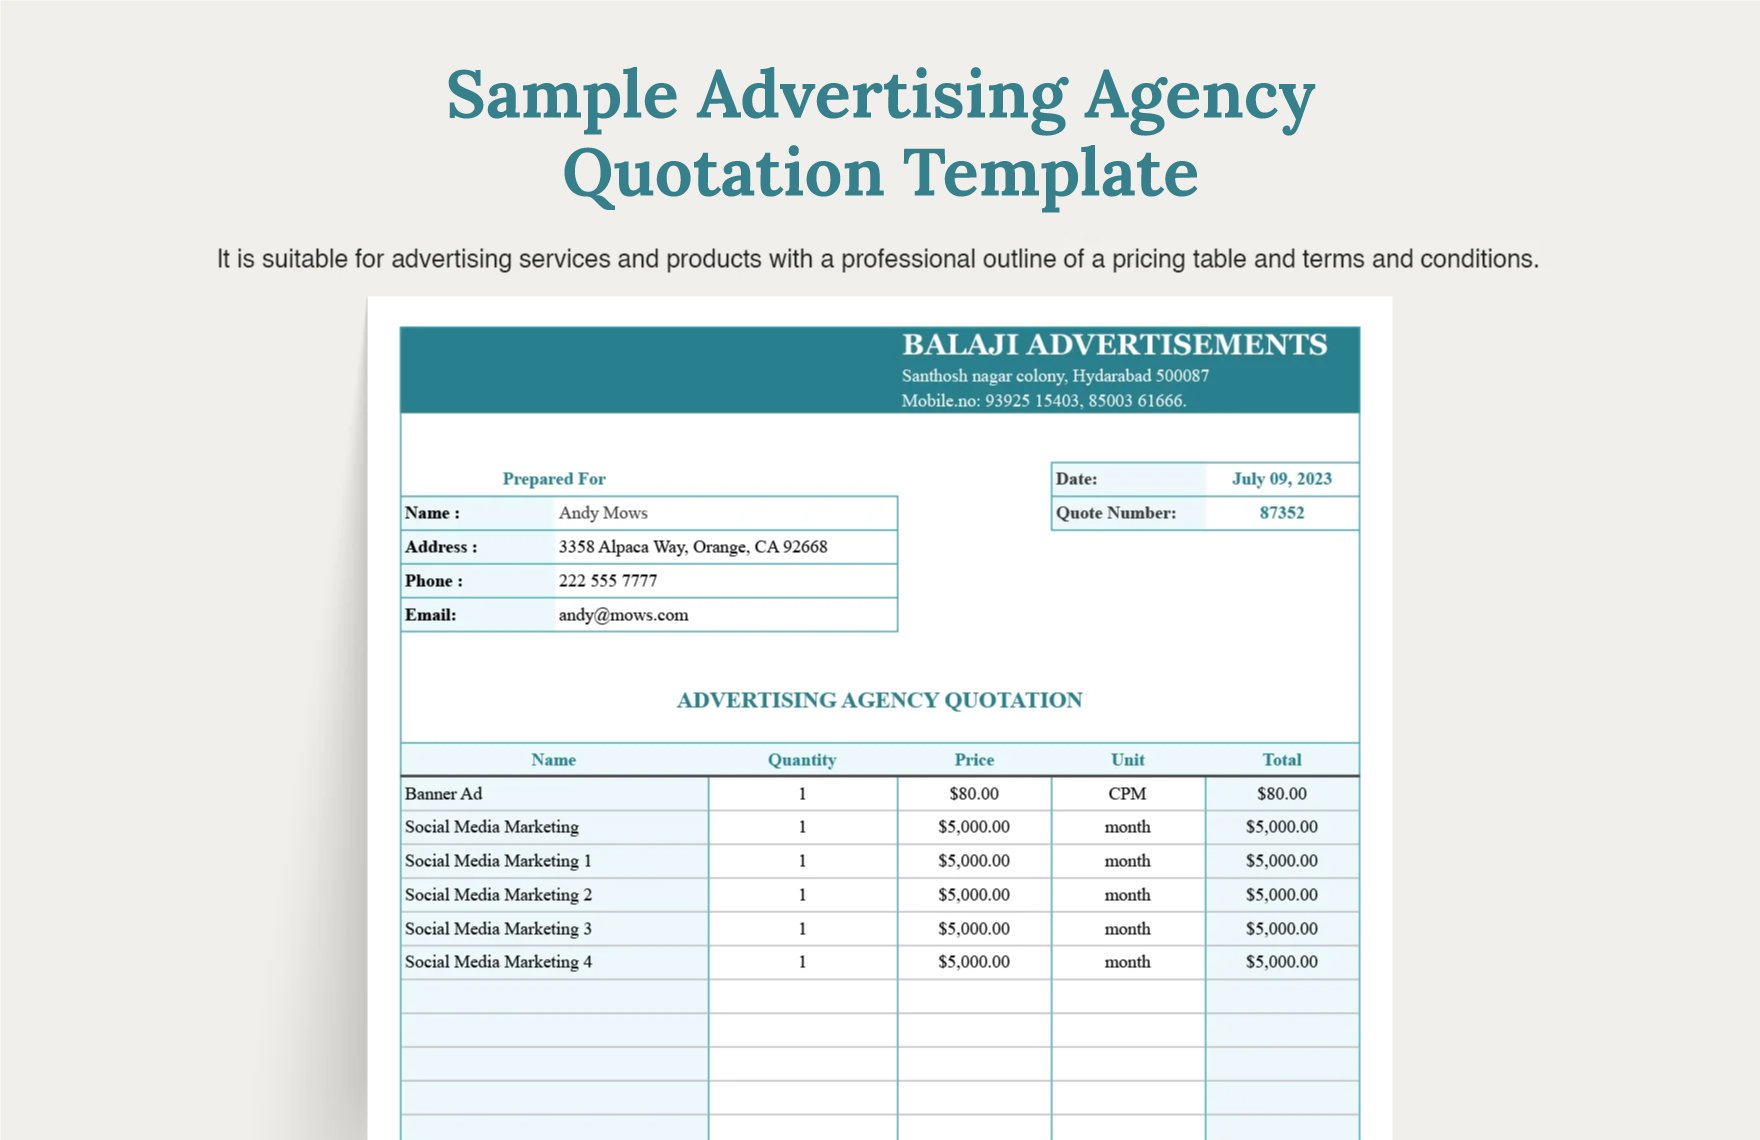 Sample Advertising Agency Quotation Template